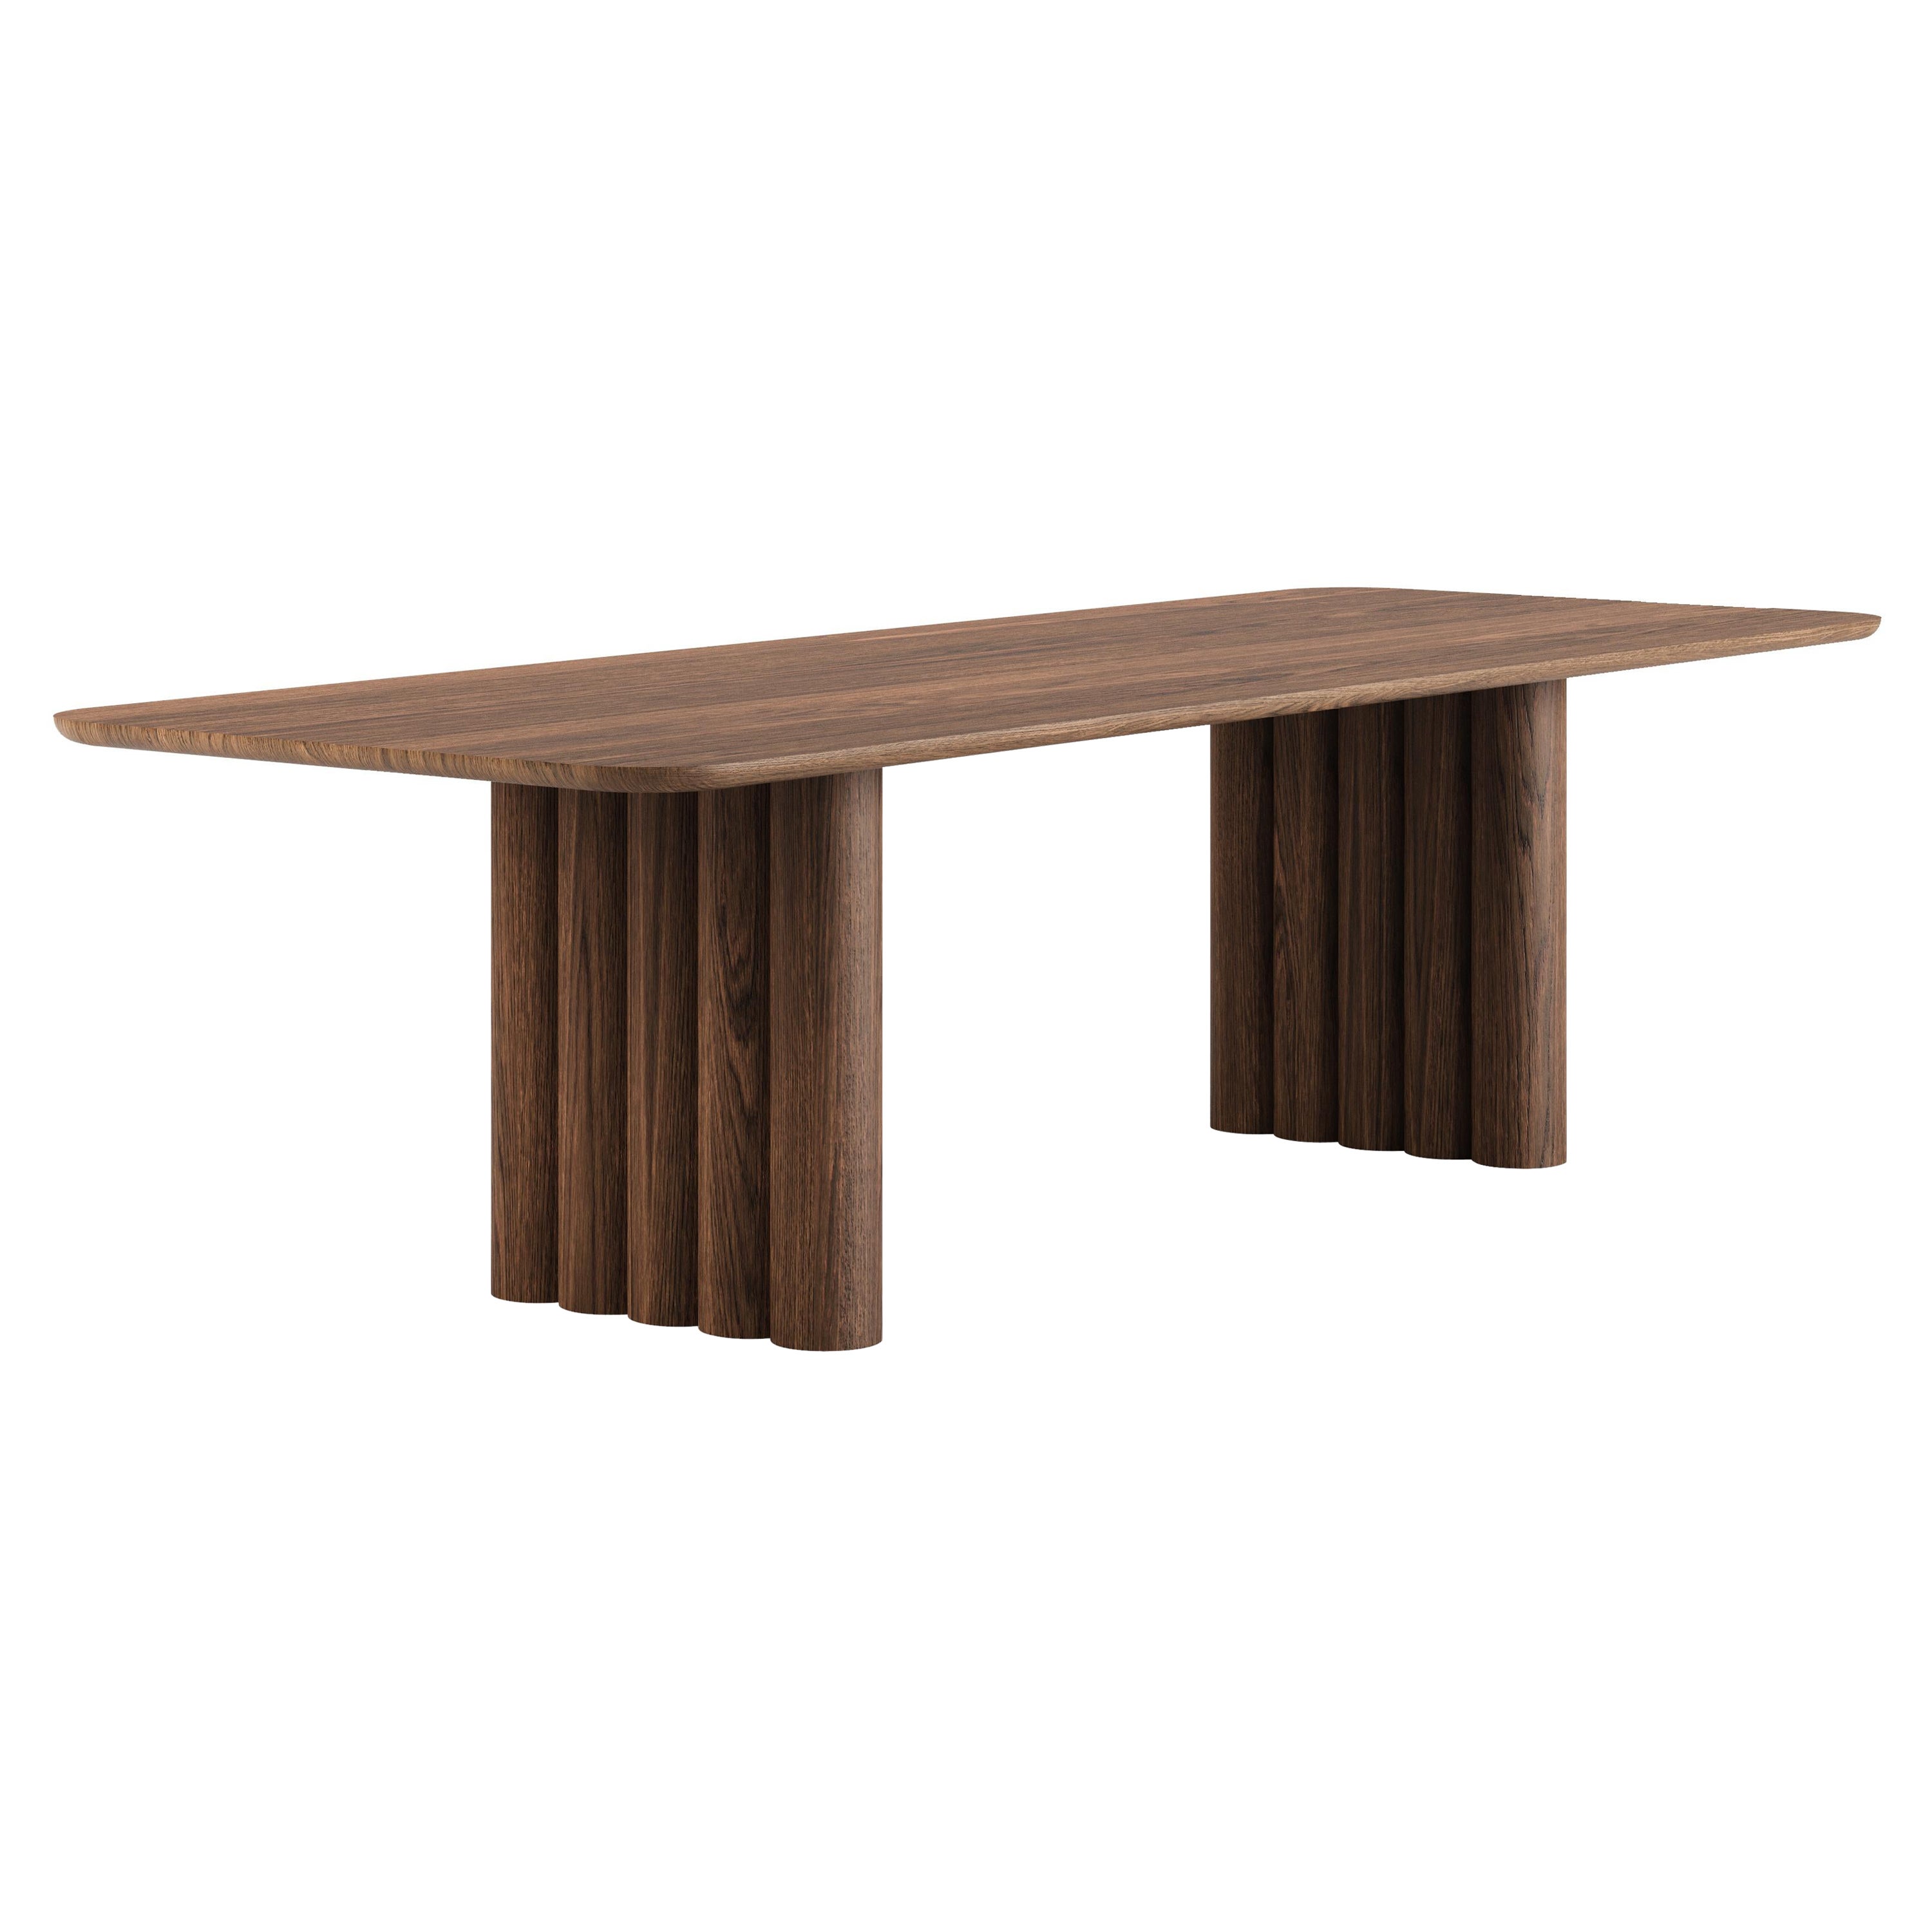 Contemporary Dining Table 'Plush' by Dk3, Smoked Oak or Walnut, 340, Rectangular For Sale